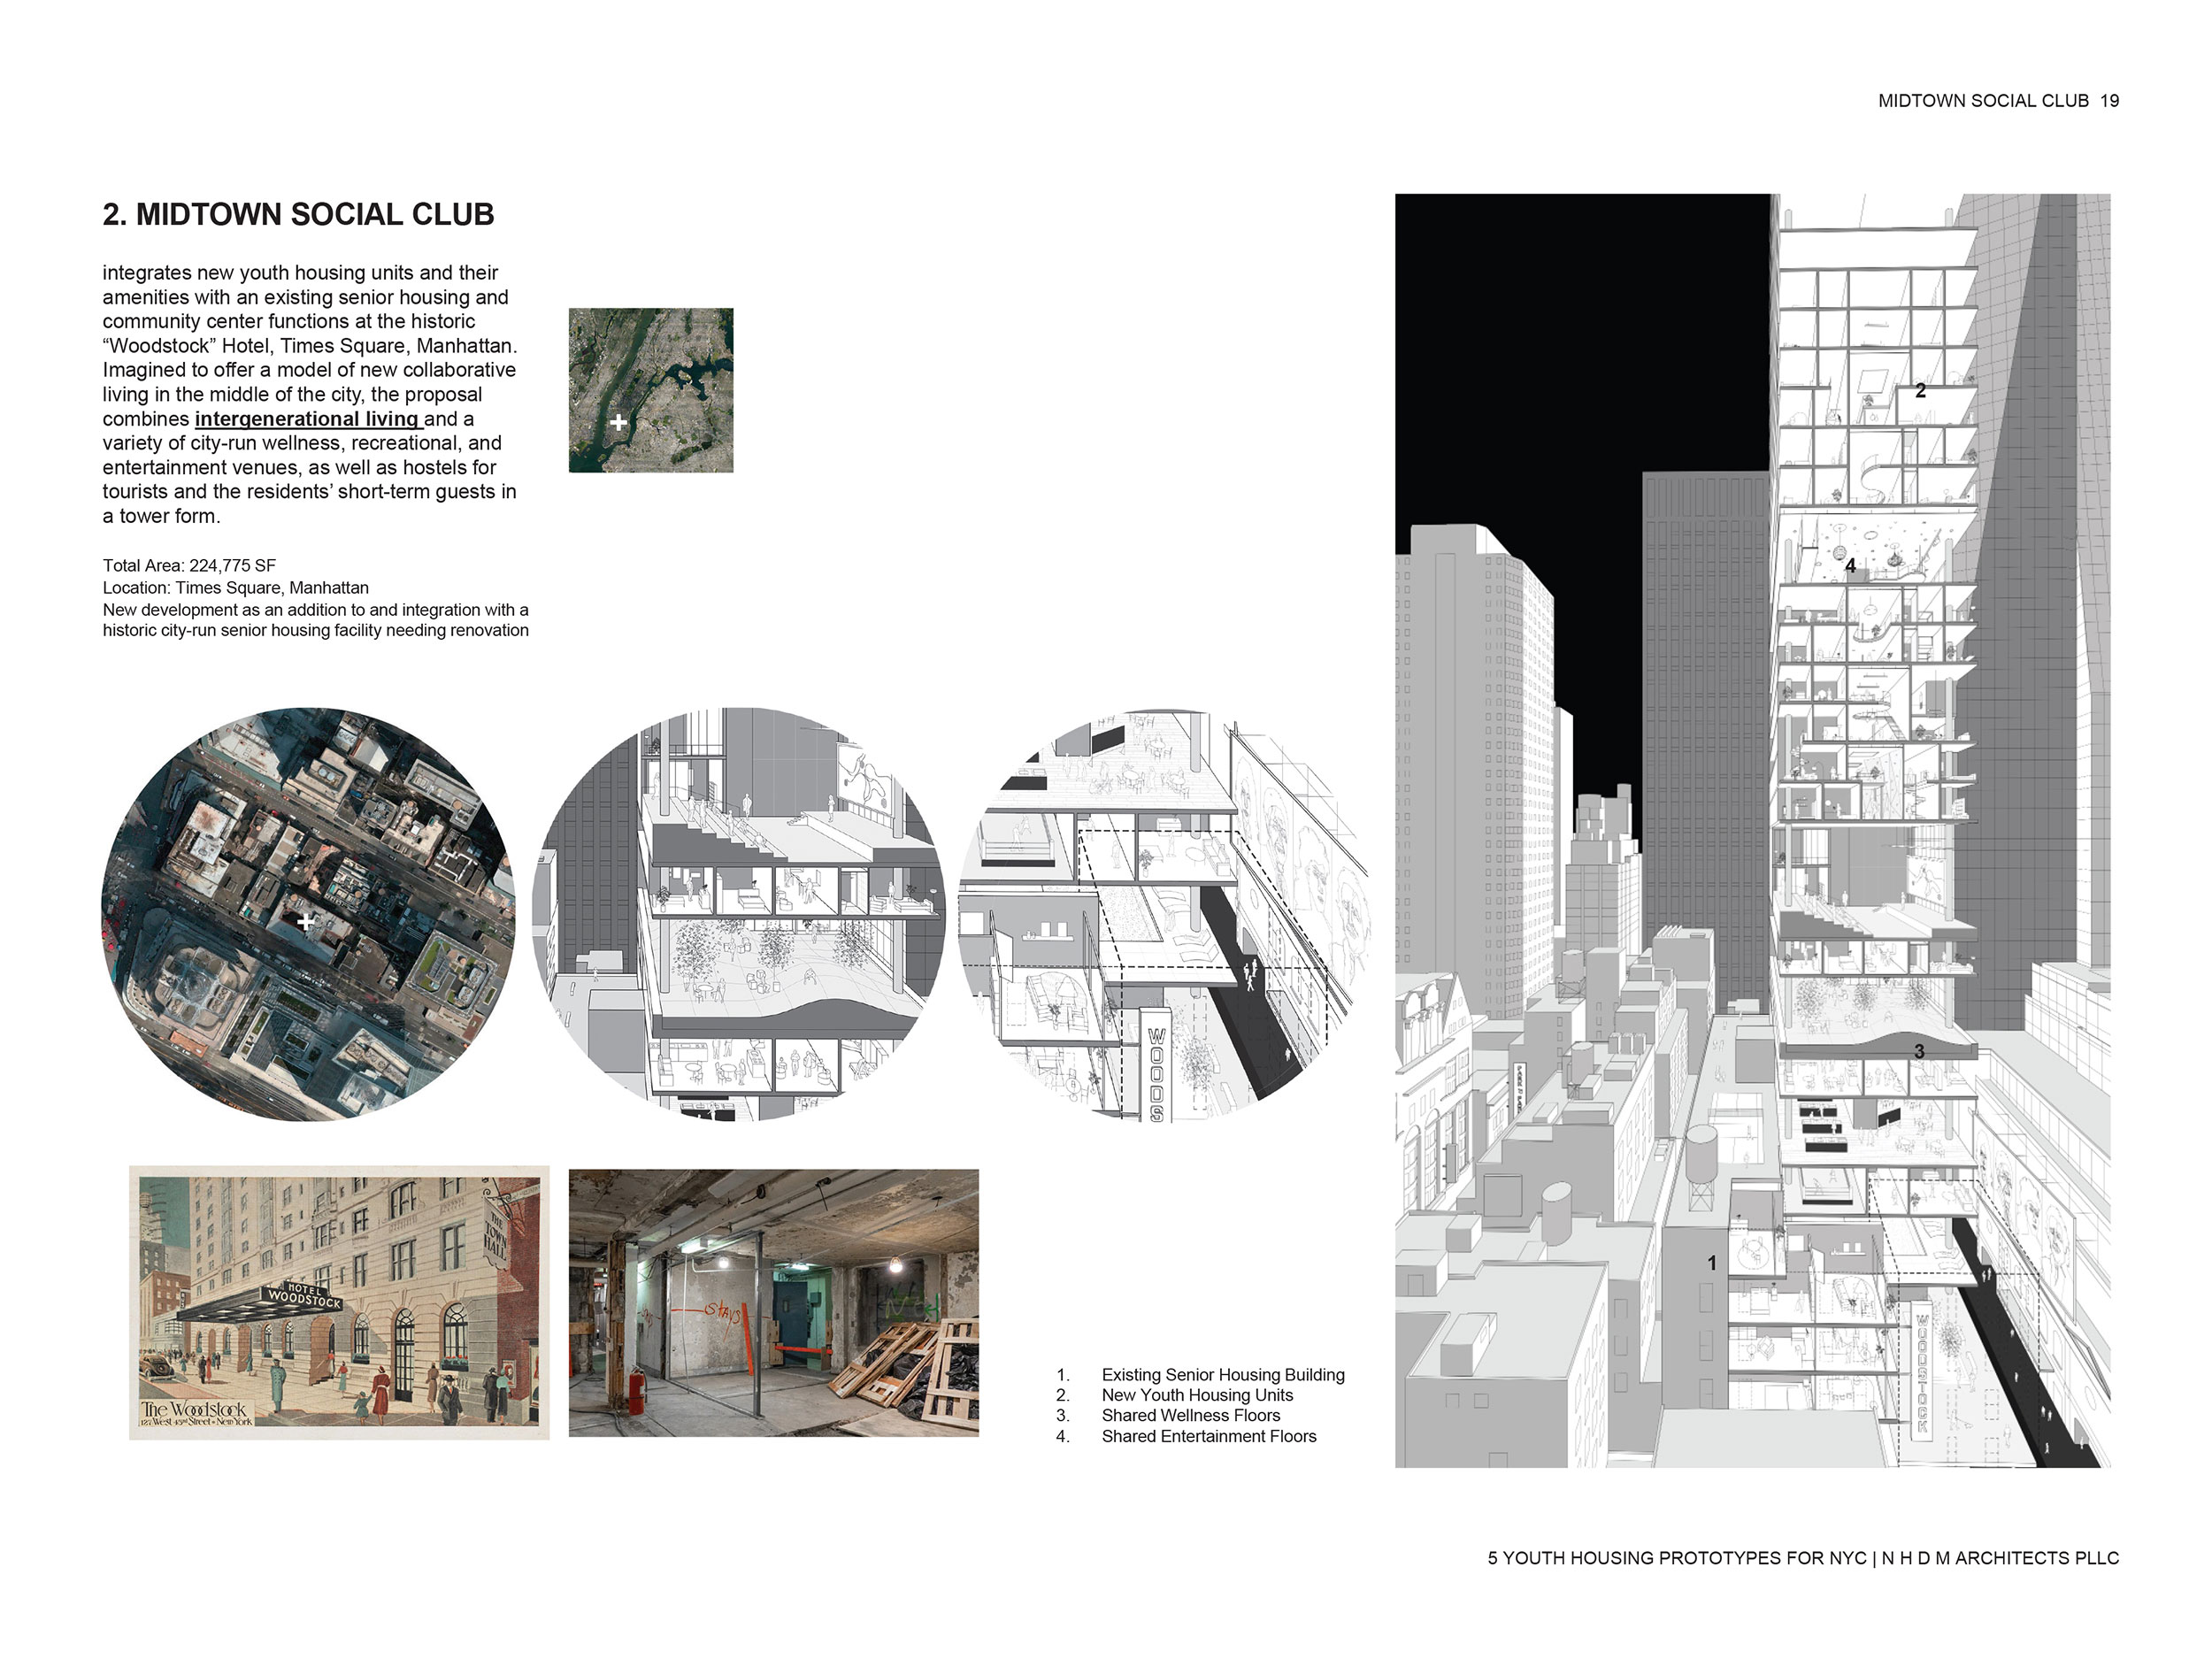 5 Youth Housing Prototypes for NYC illustration 3